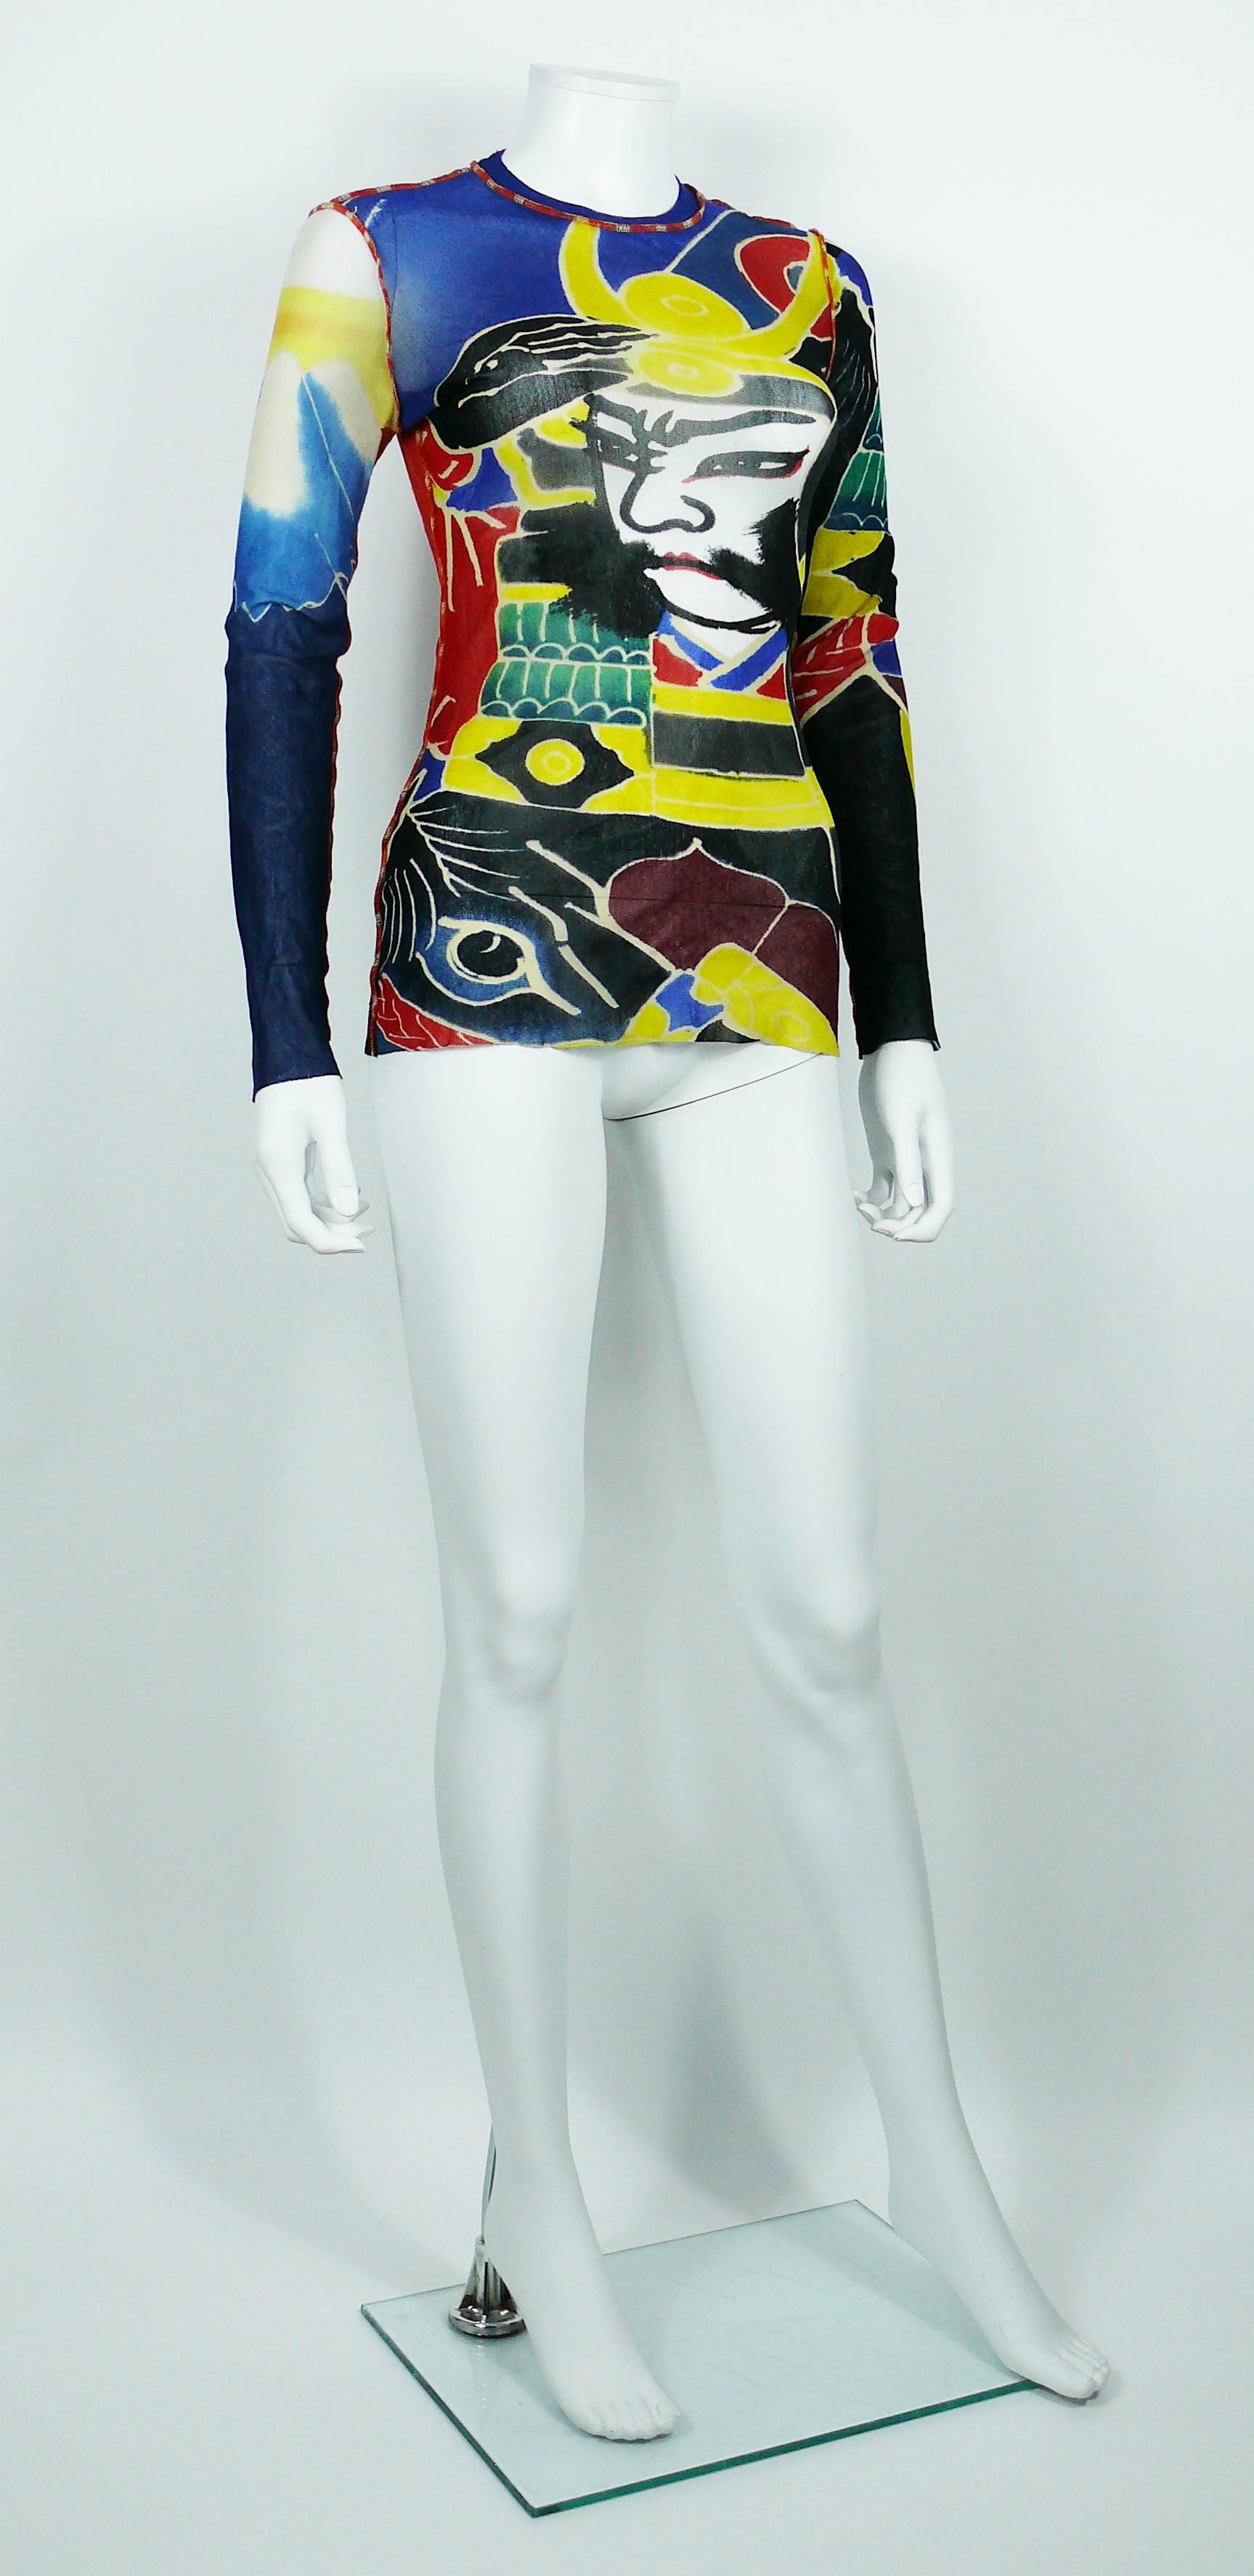 JEAN PAUL GAULTIER Maille vintage unisex sheer mesh nylon top featuring a Japanese colorful print tattoo design.

Exposed knit seams.

Label reads Jean Paul Gaultier Maille Made in Italy.

Missing composition and care tag.

Size tag reads :